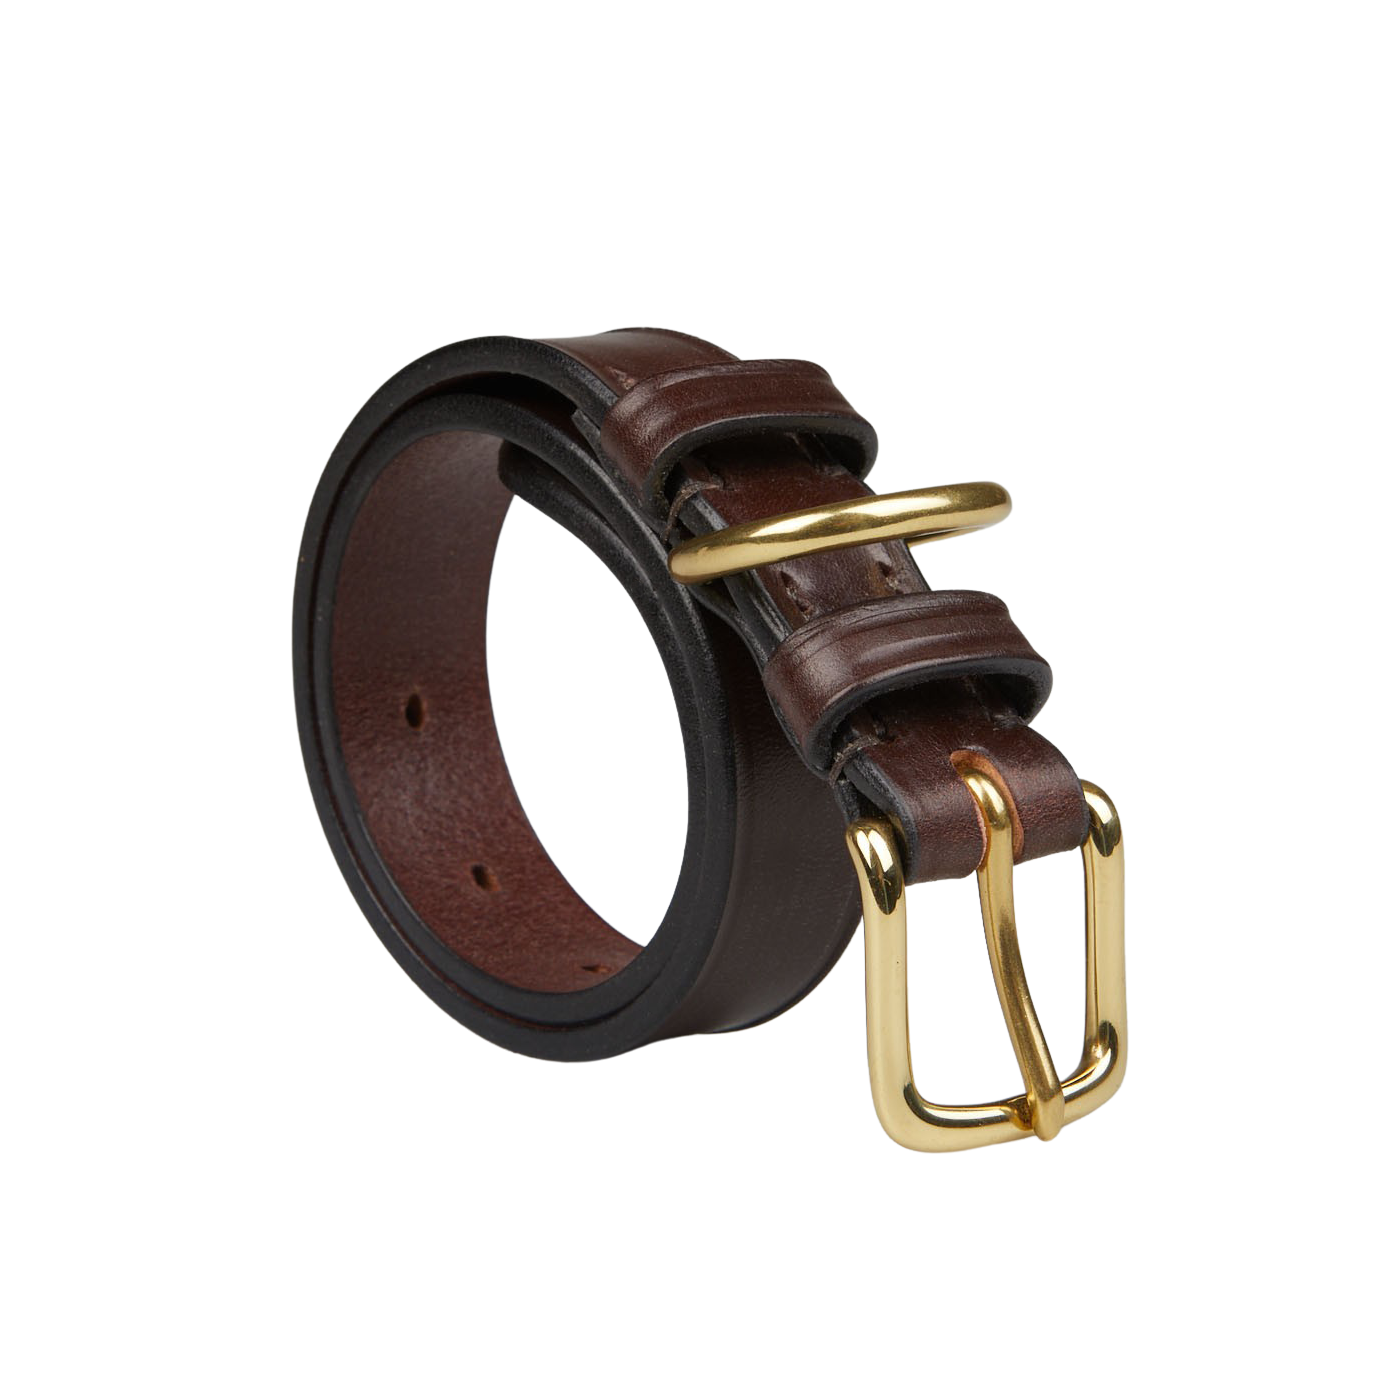 A Dark Brown Saddle Leather Large Dog Collar by Hardy & Parsons.